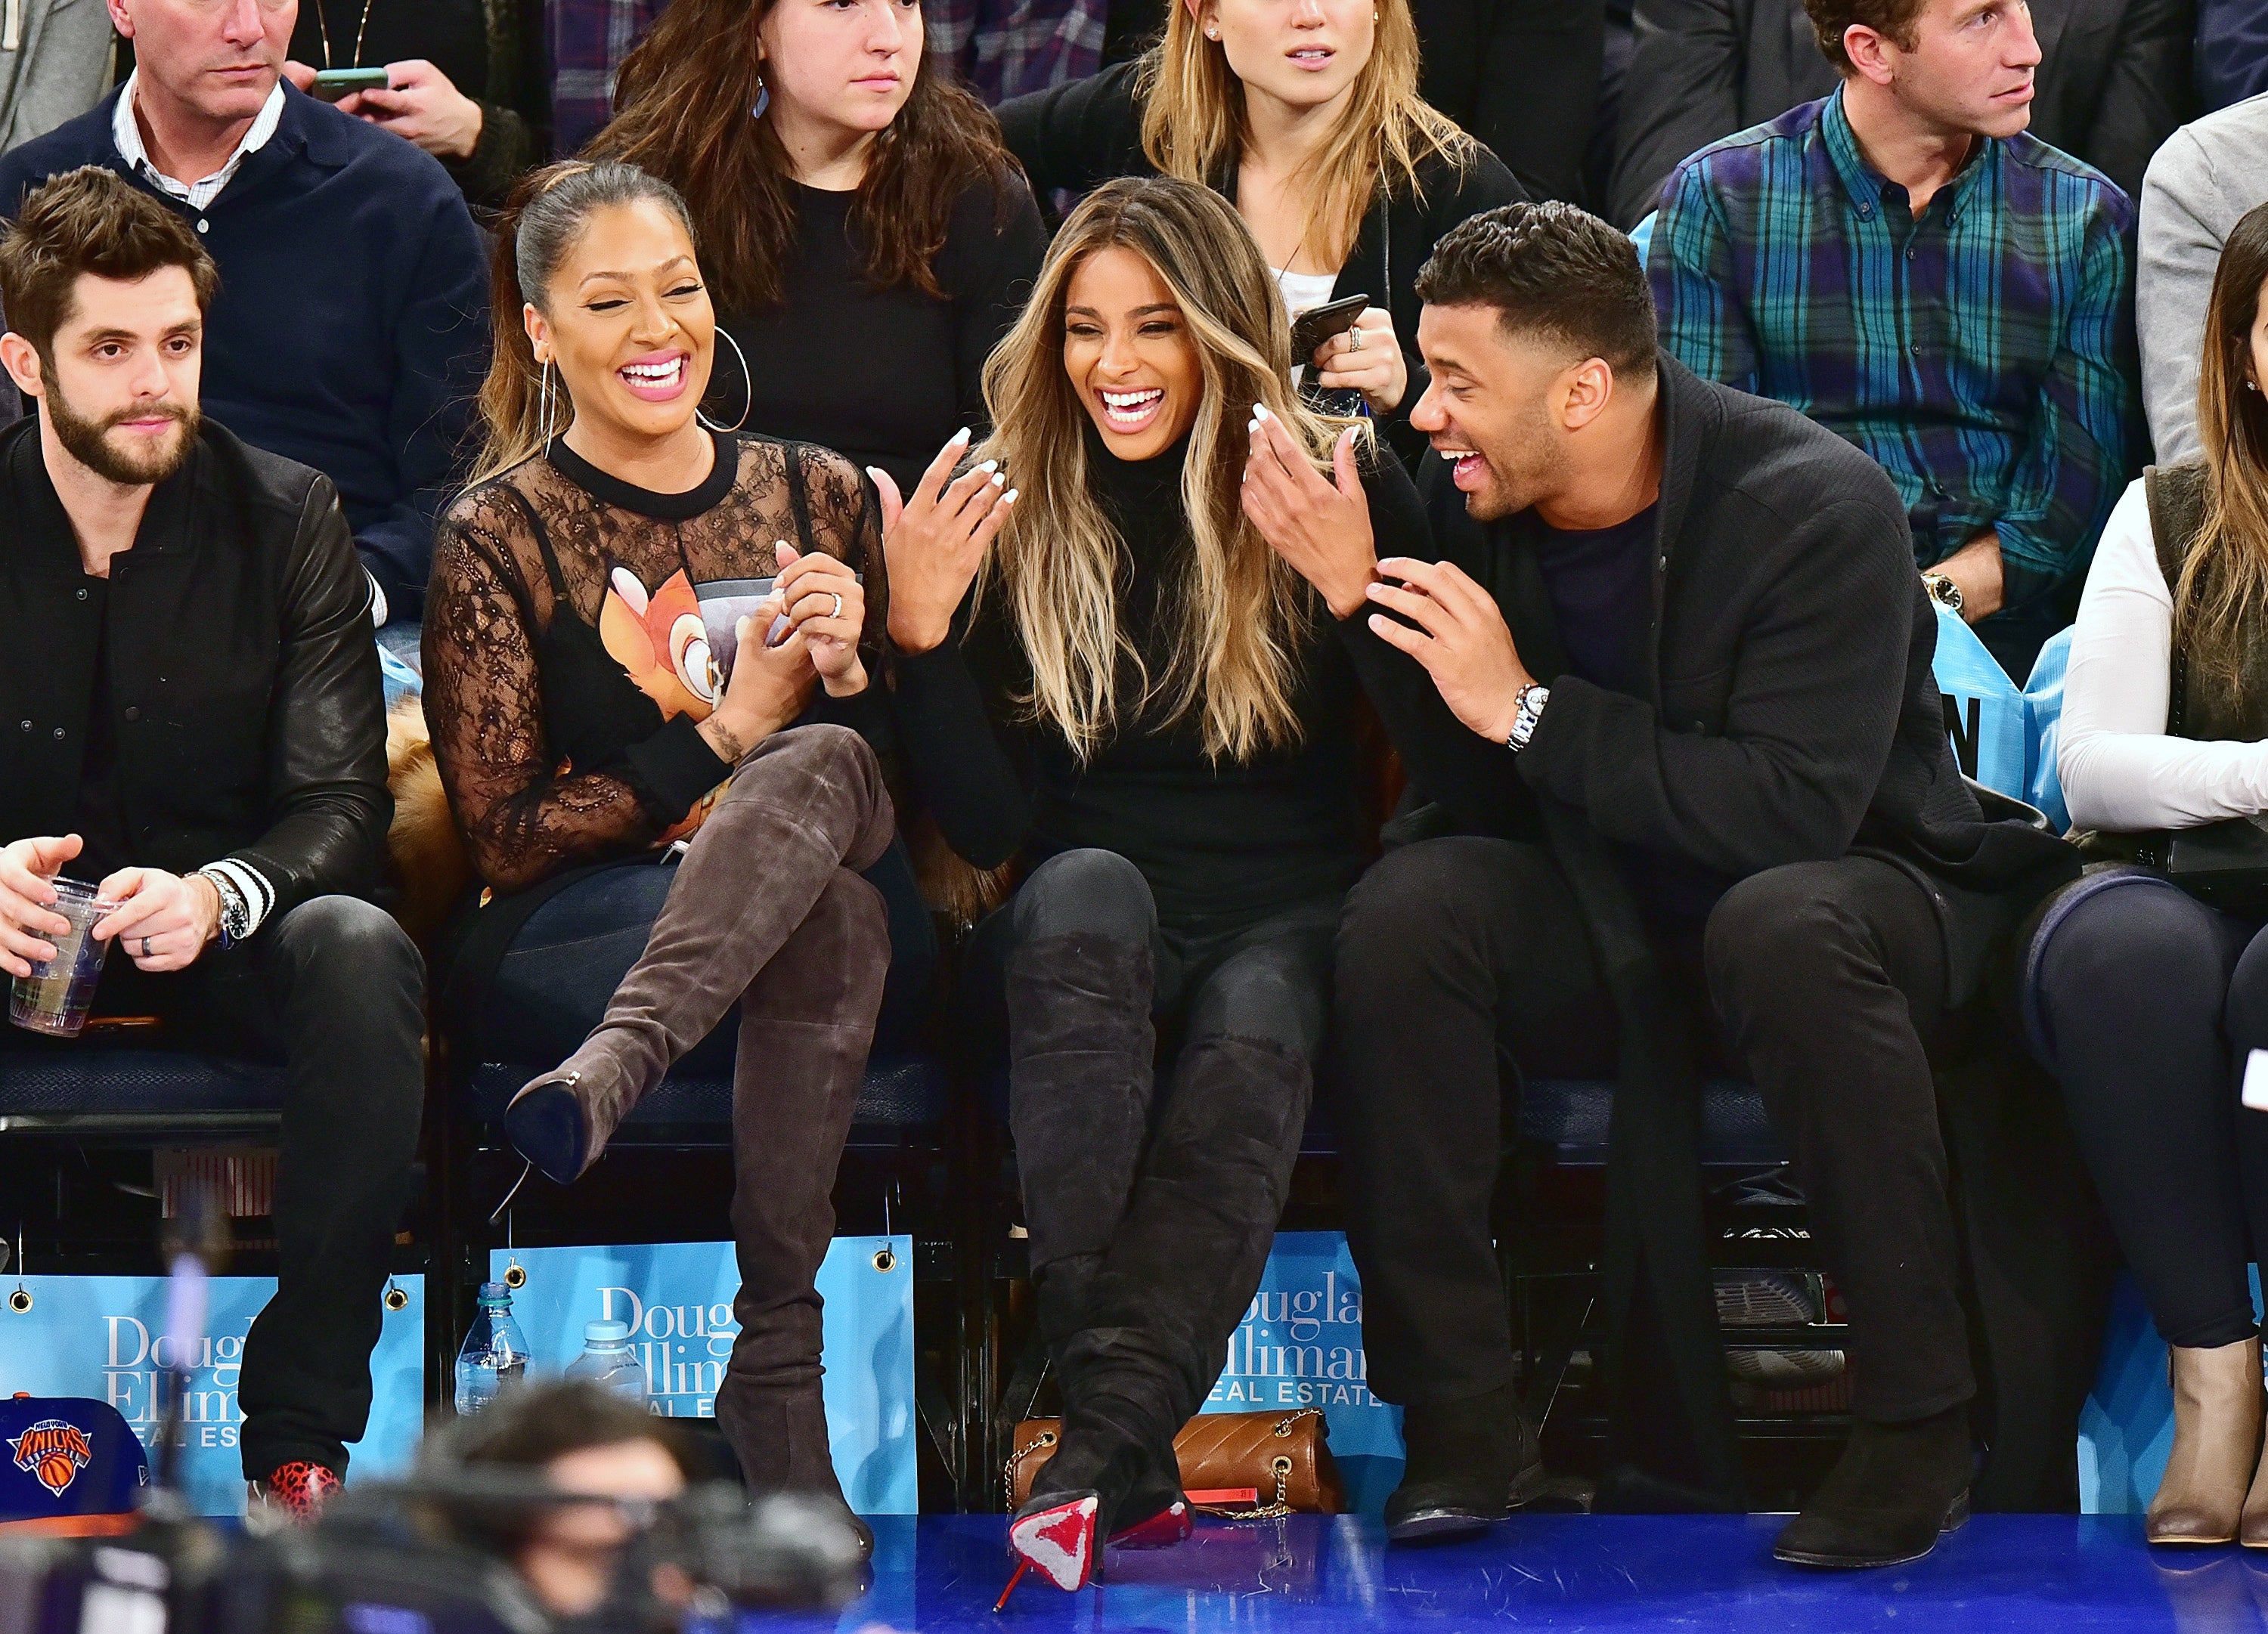 LaLa Anthony, Ciara, Russell Wilson and More!
